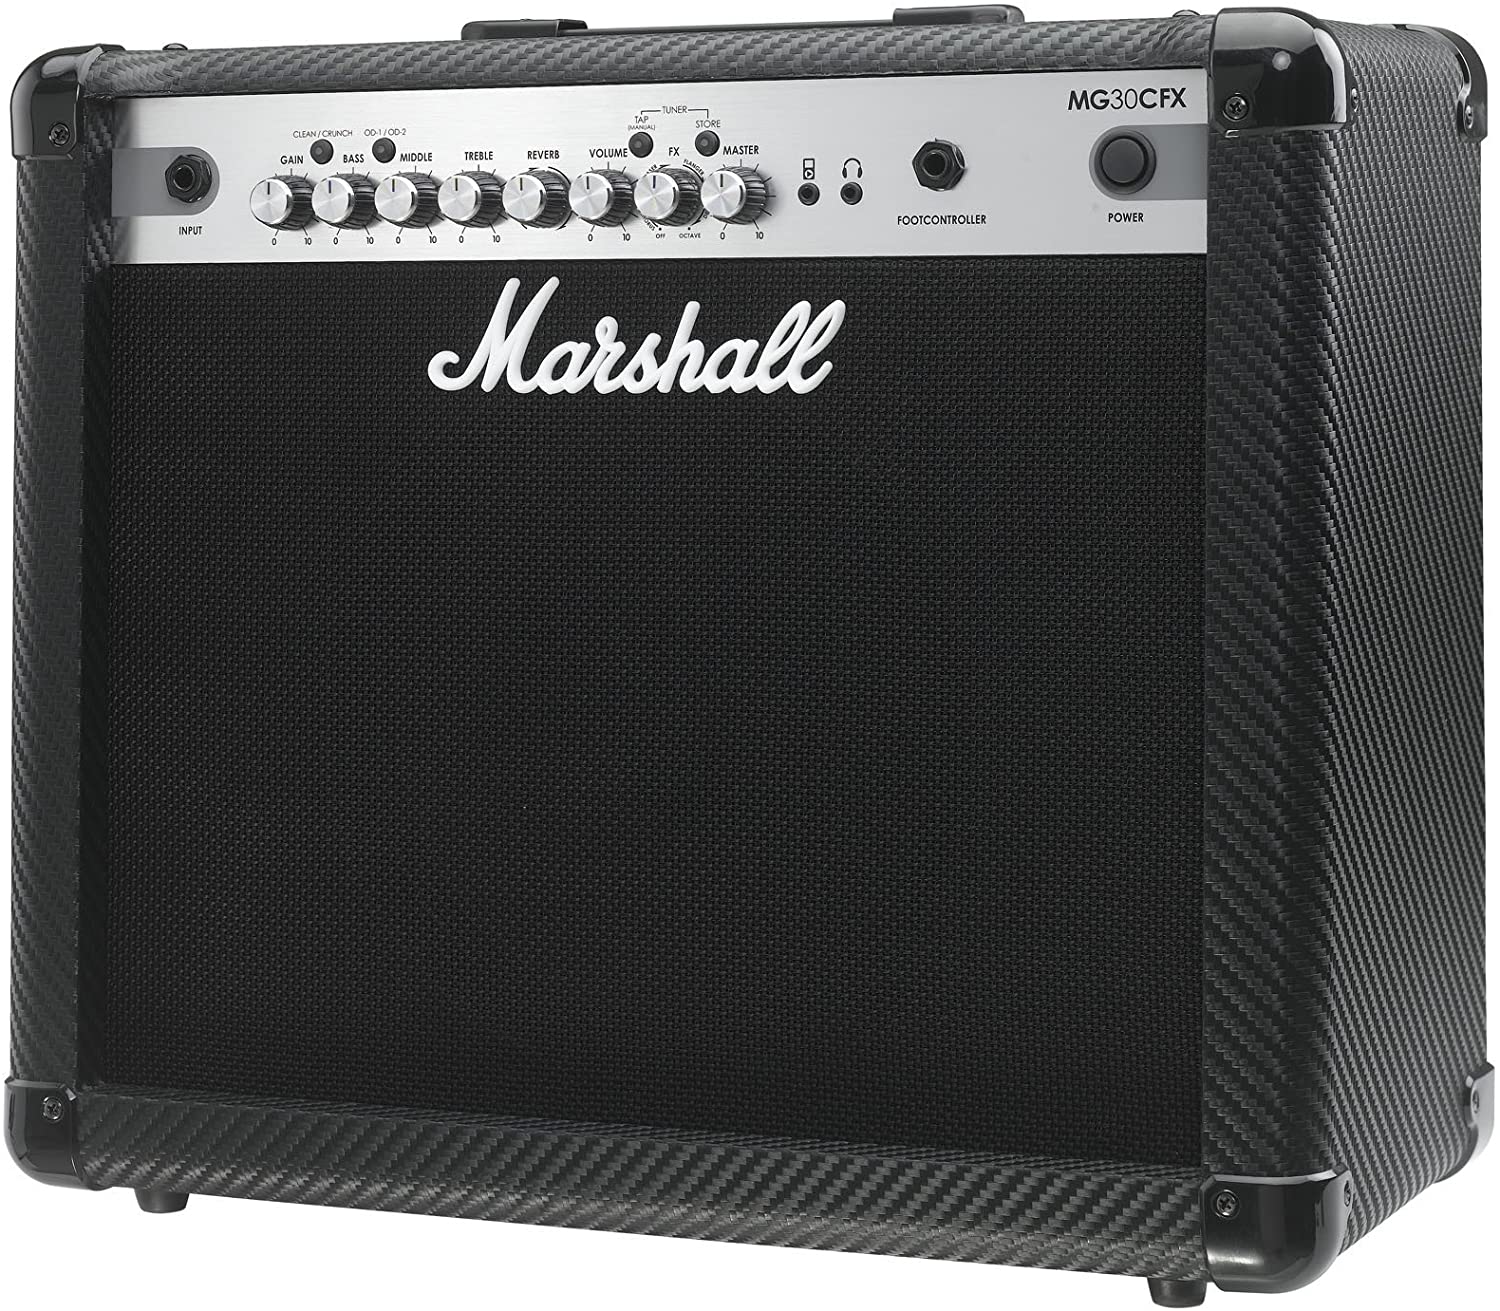 Marshall MG50CFX 50-Watt Electric Guitar Amplifier Combo With Effects